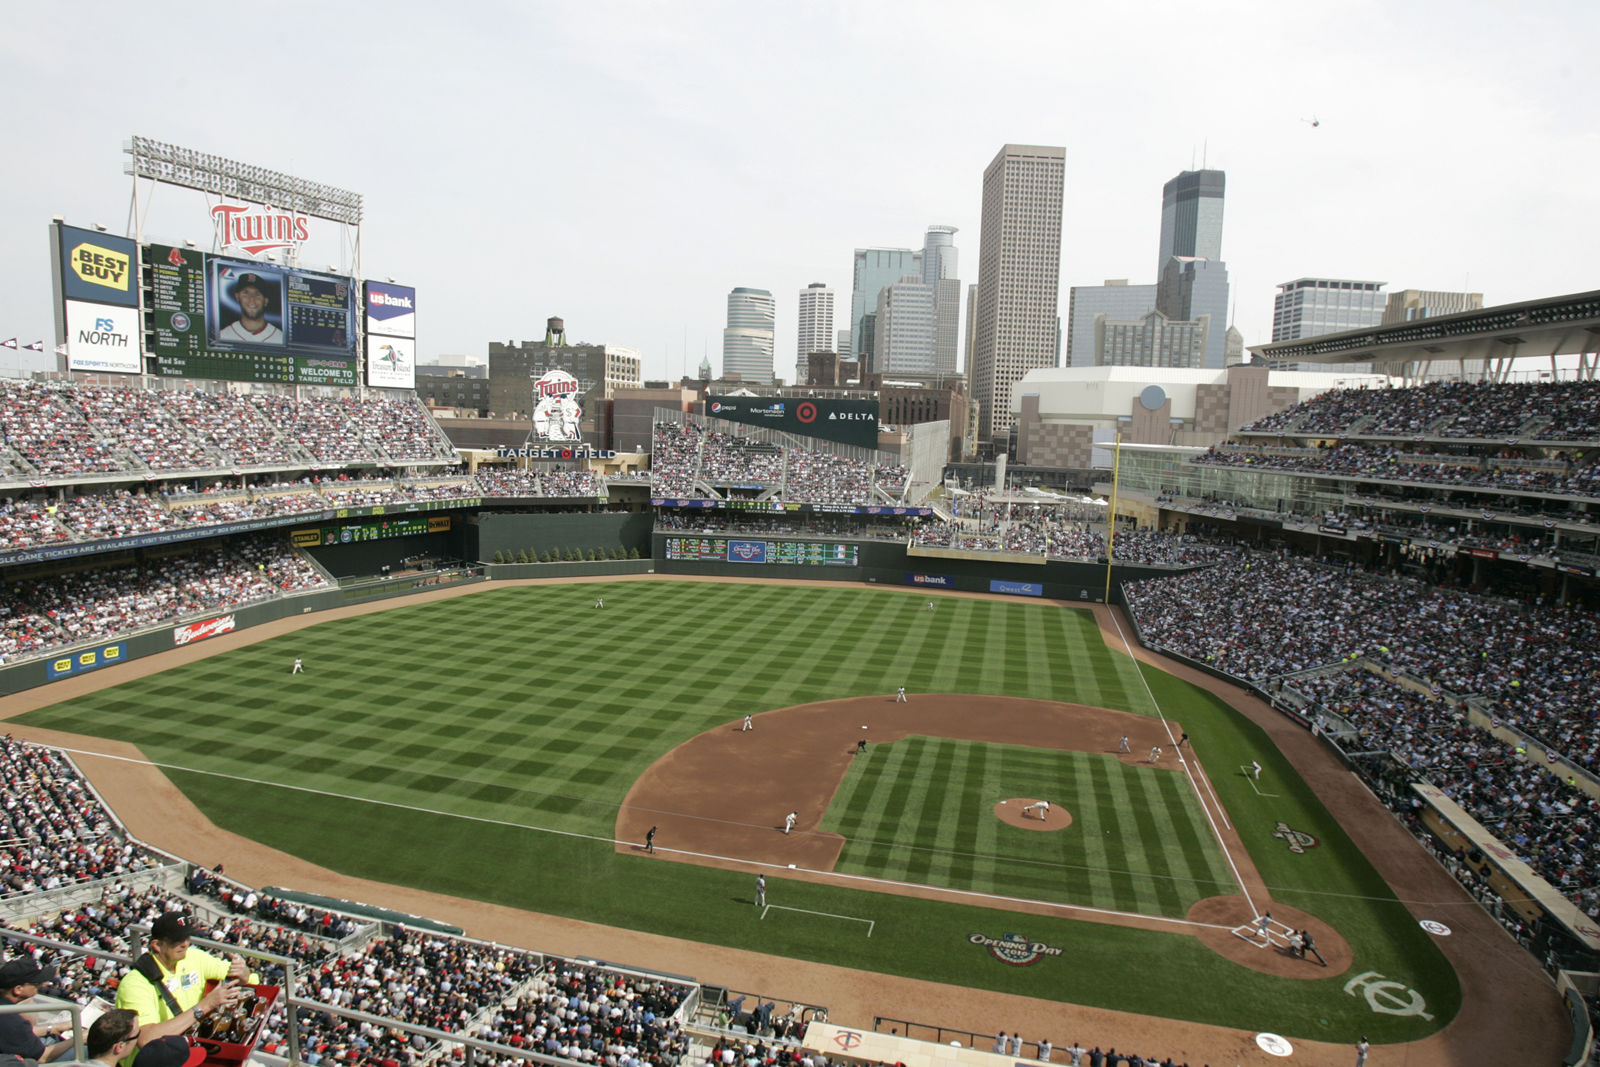 Target Field, the home of the Minnesota Twins, comes in at No. 19 with an average cost of $63.67. File. (AP Photo/Paul Battaglia)